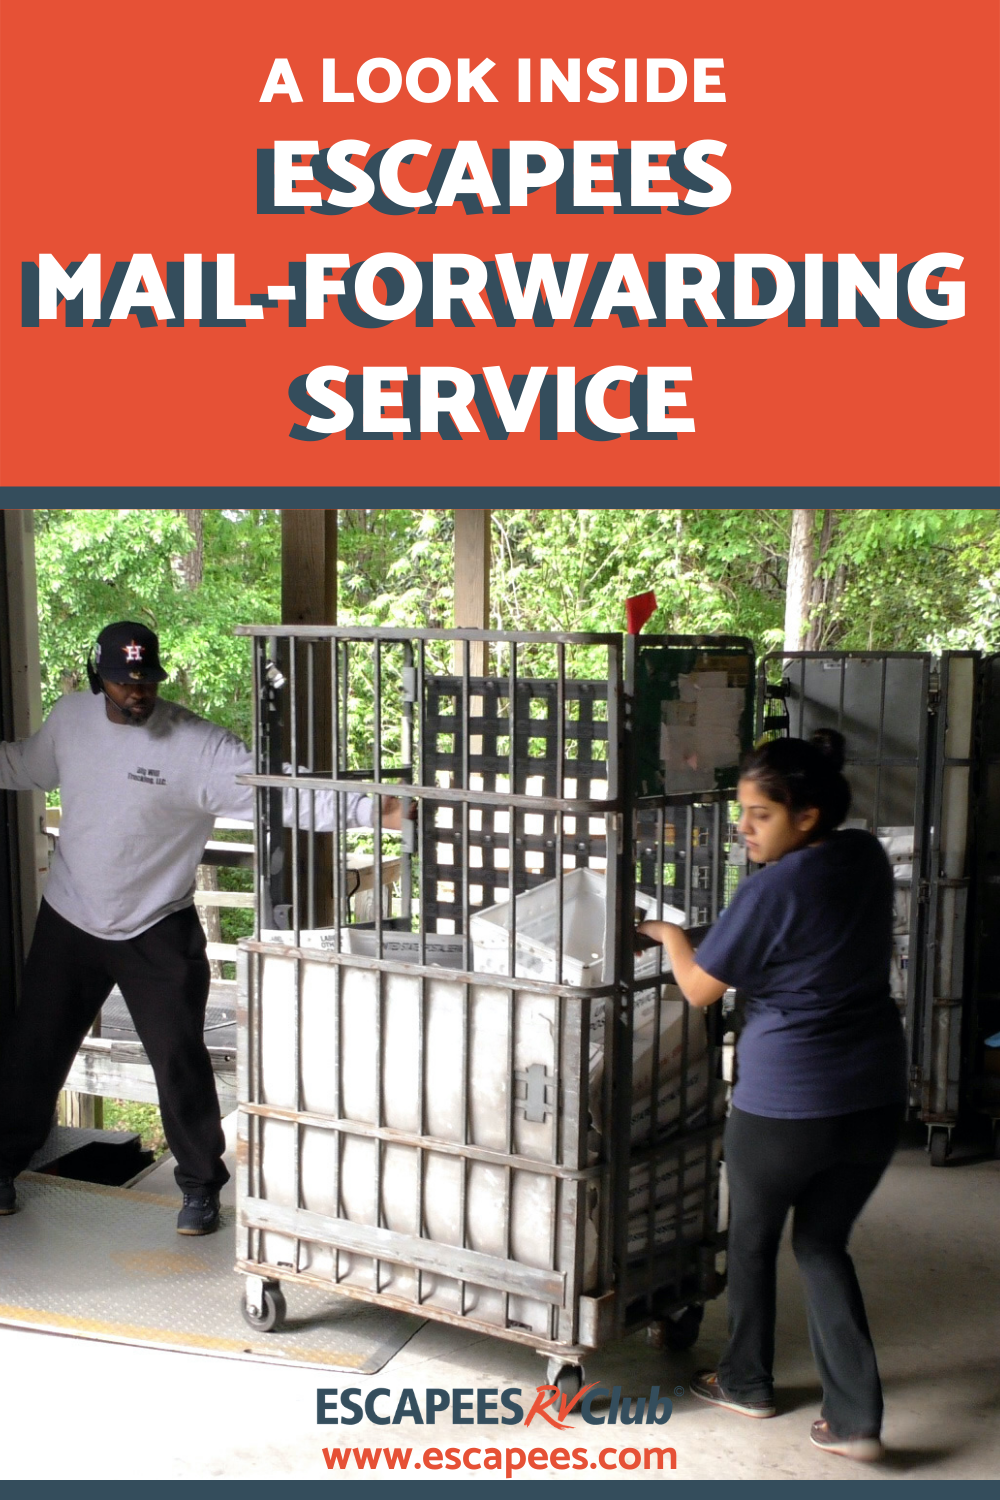 A Look Inside Escapees Mail-Forwarding Service for RVers 40